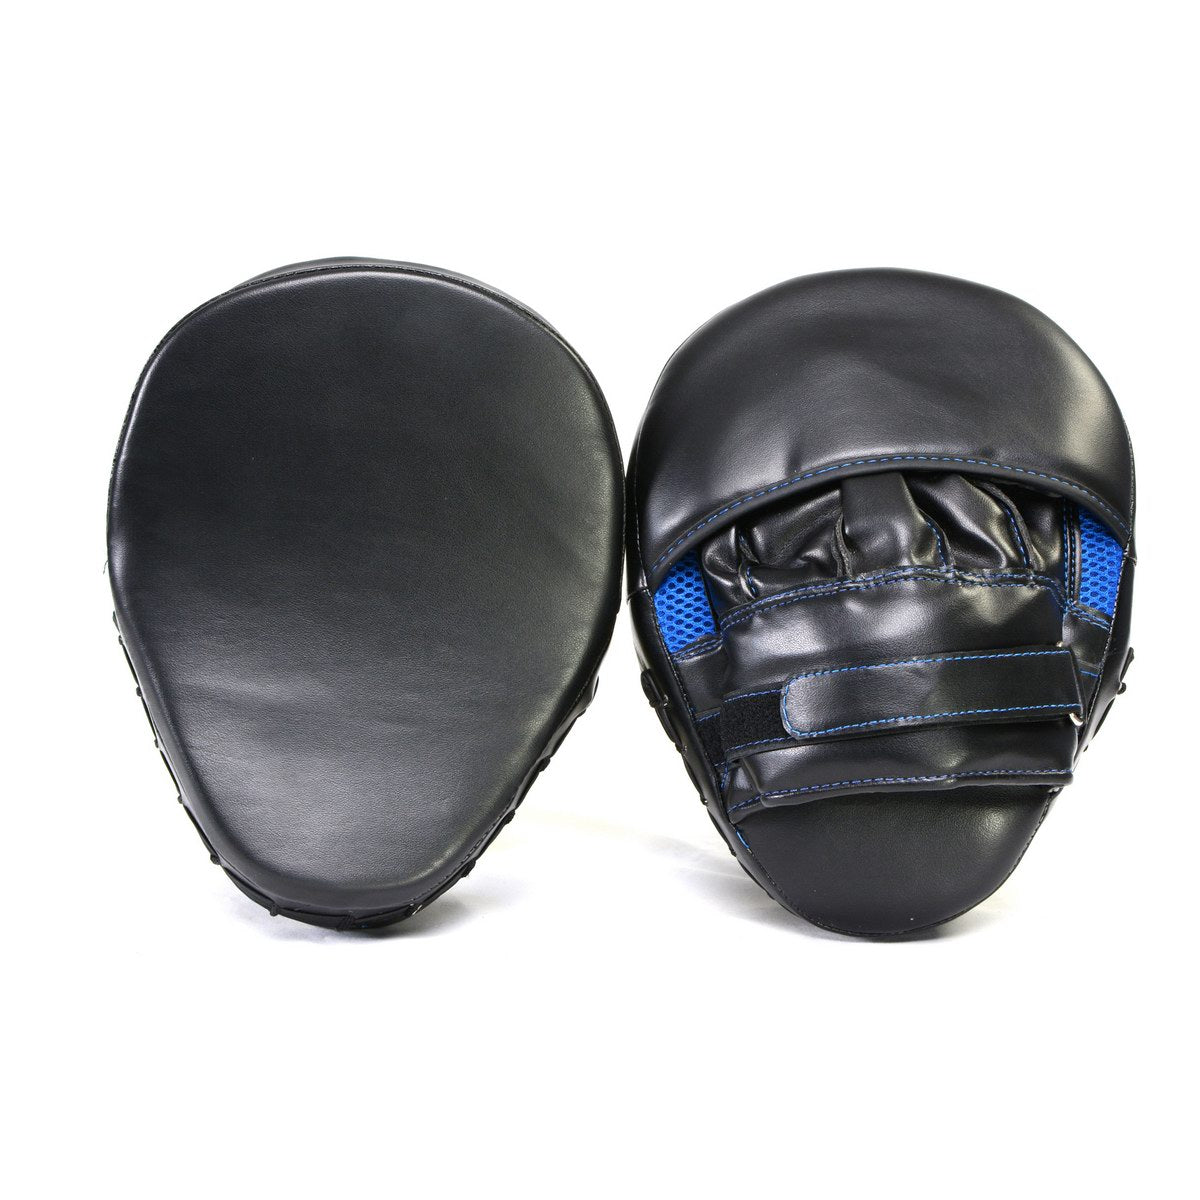 X Fitness XF8000 Curved Boxing MMA Punching Mitts-BLK/BLUE